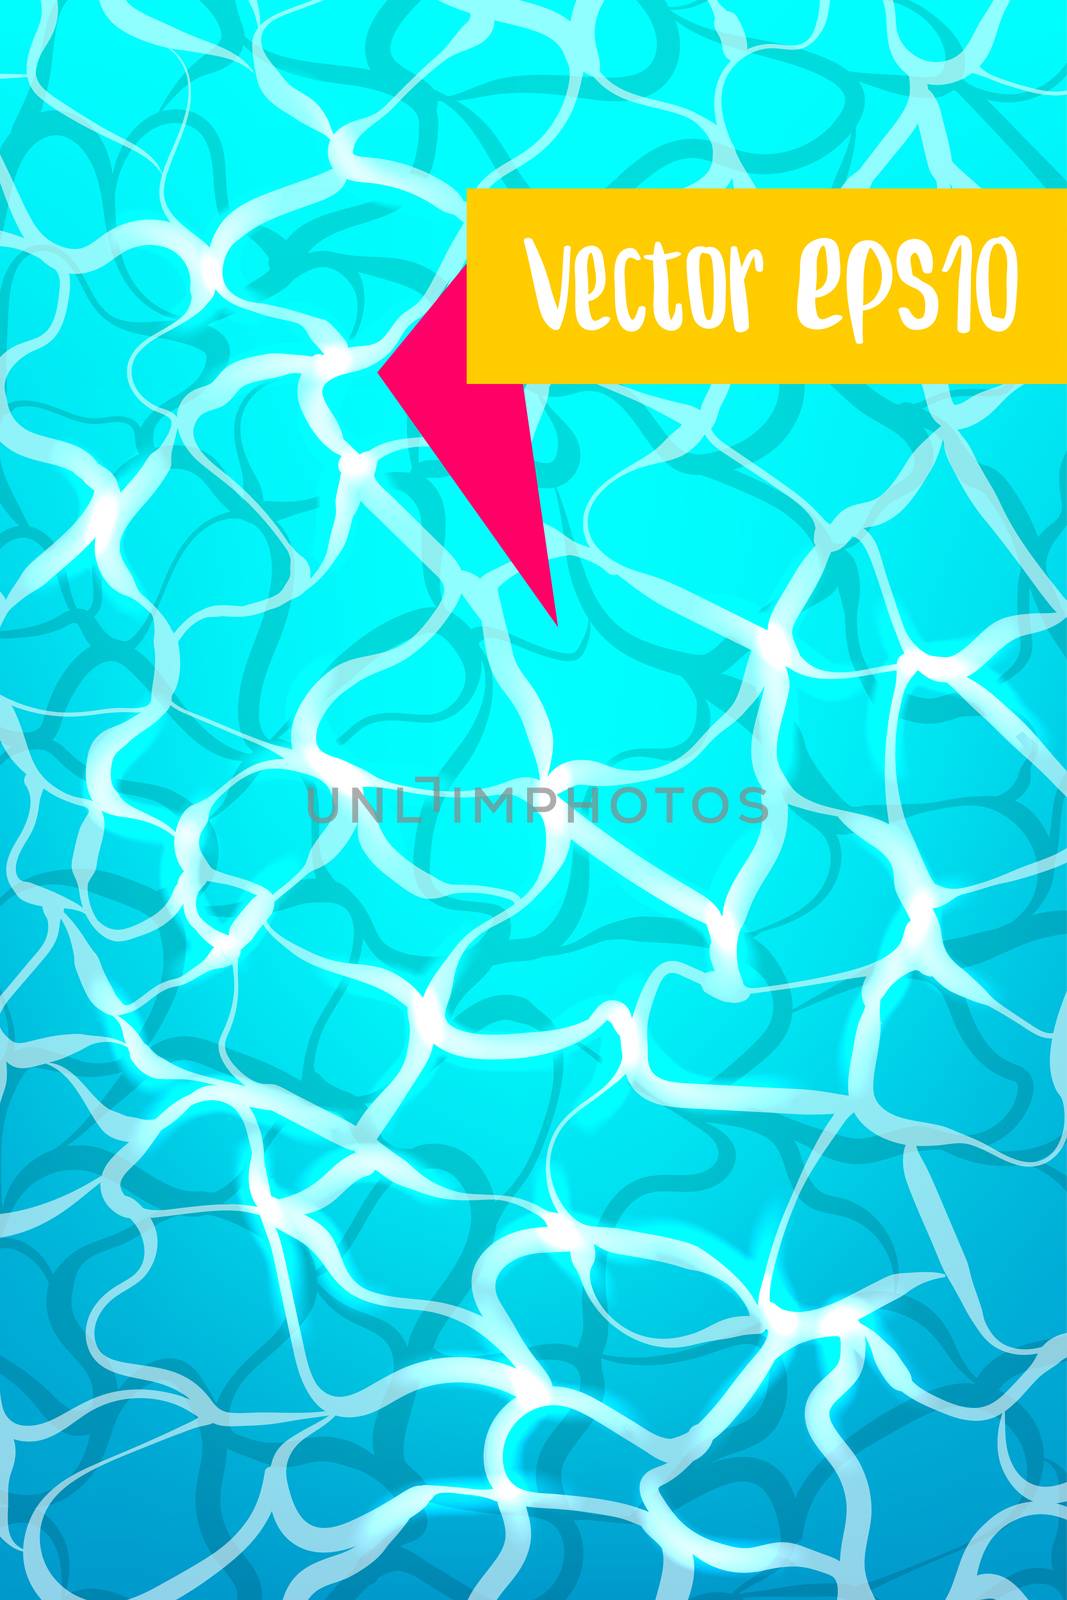 Vertical Hello summer pattern poster. Sea water pool waves vector background illustration. Travel tropical relax spa banner. Clear underwater template.